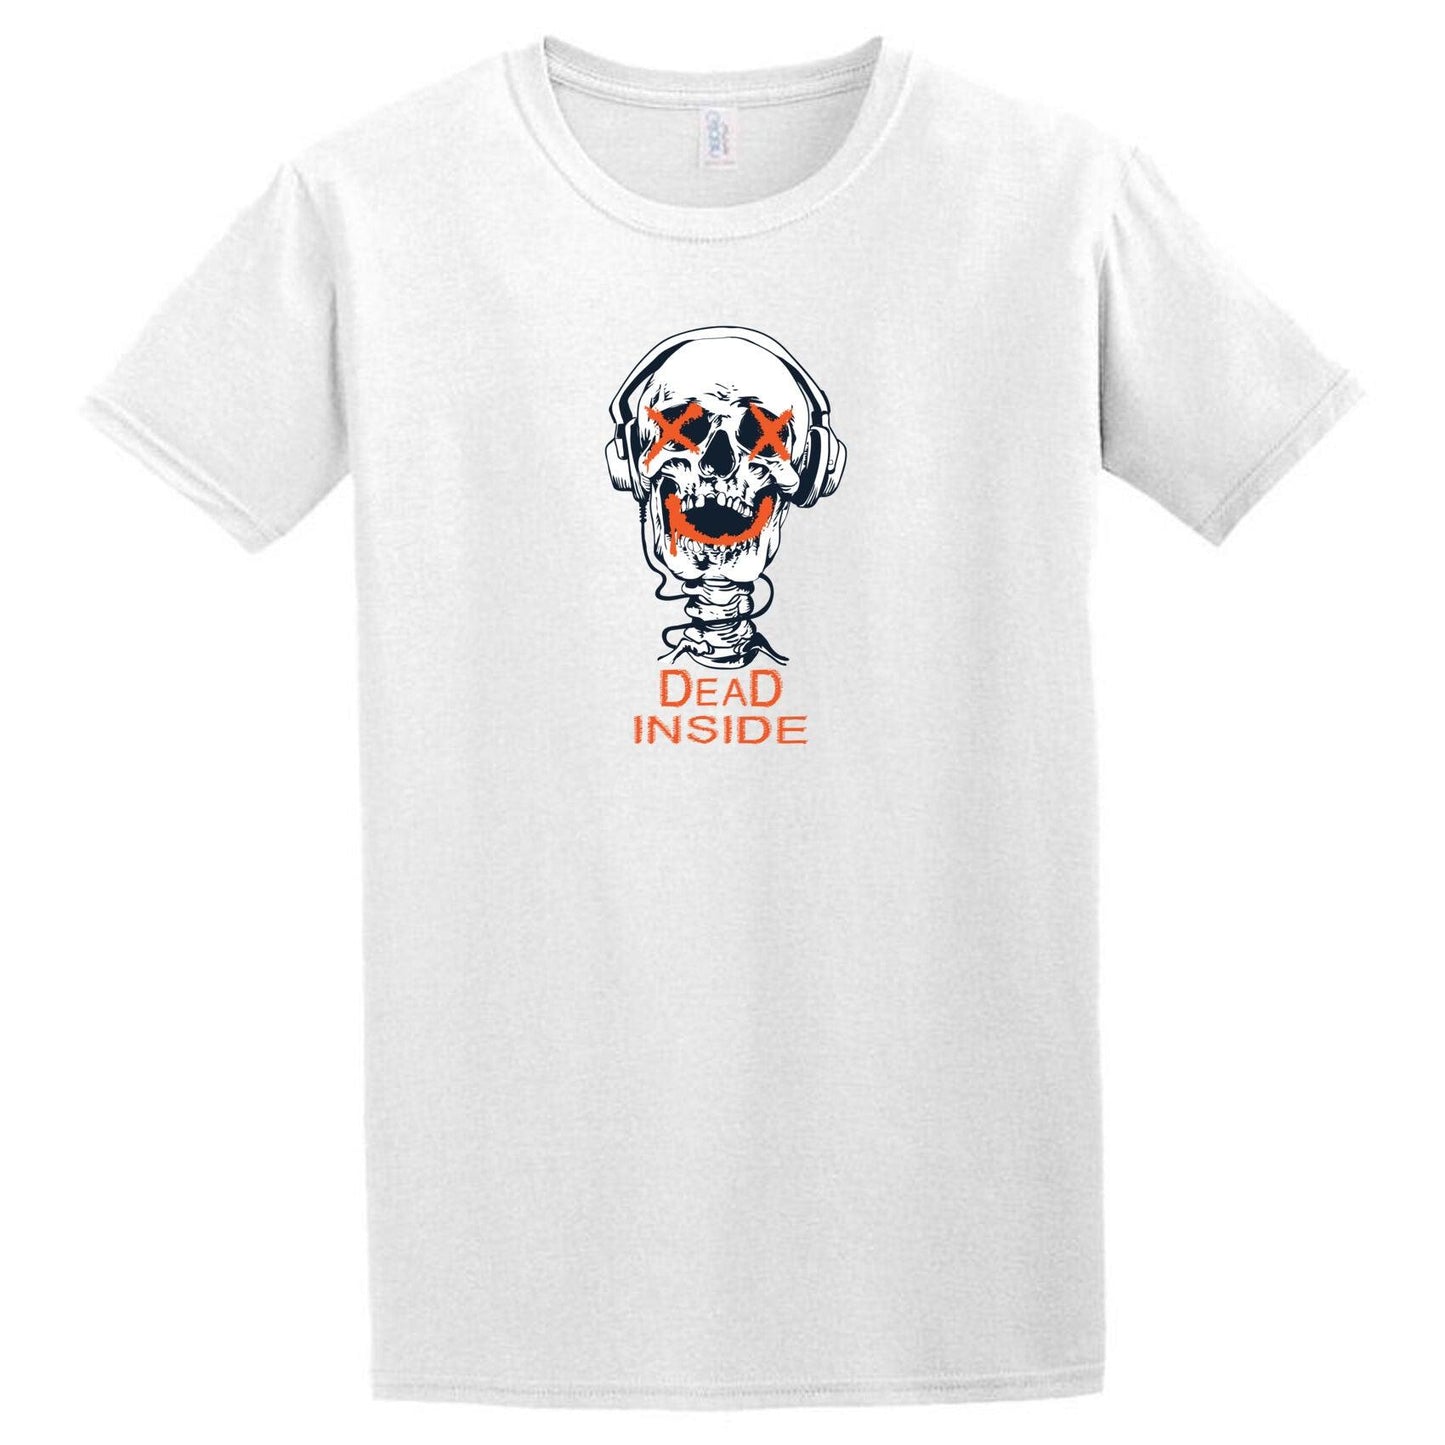 A Dead Inside T-Shirt from Twisted Gifts with an orange skull on it.